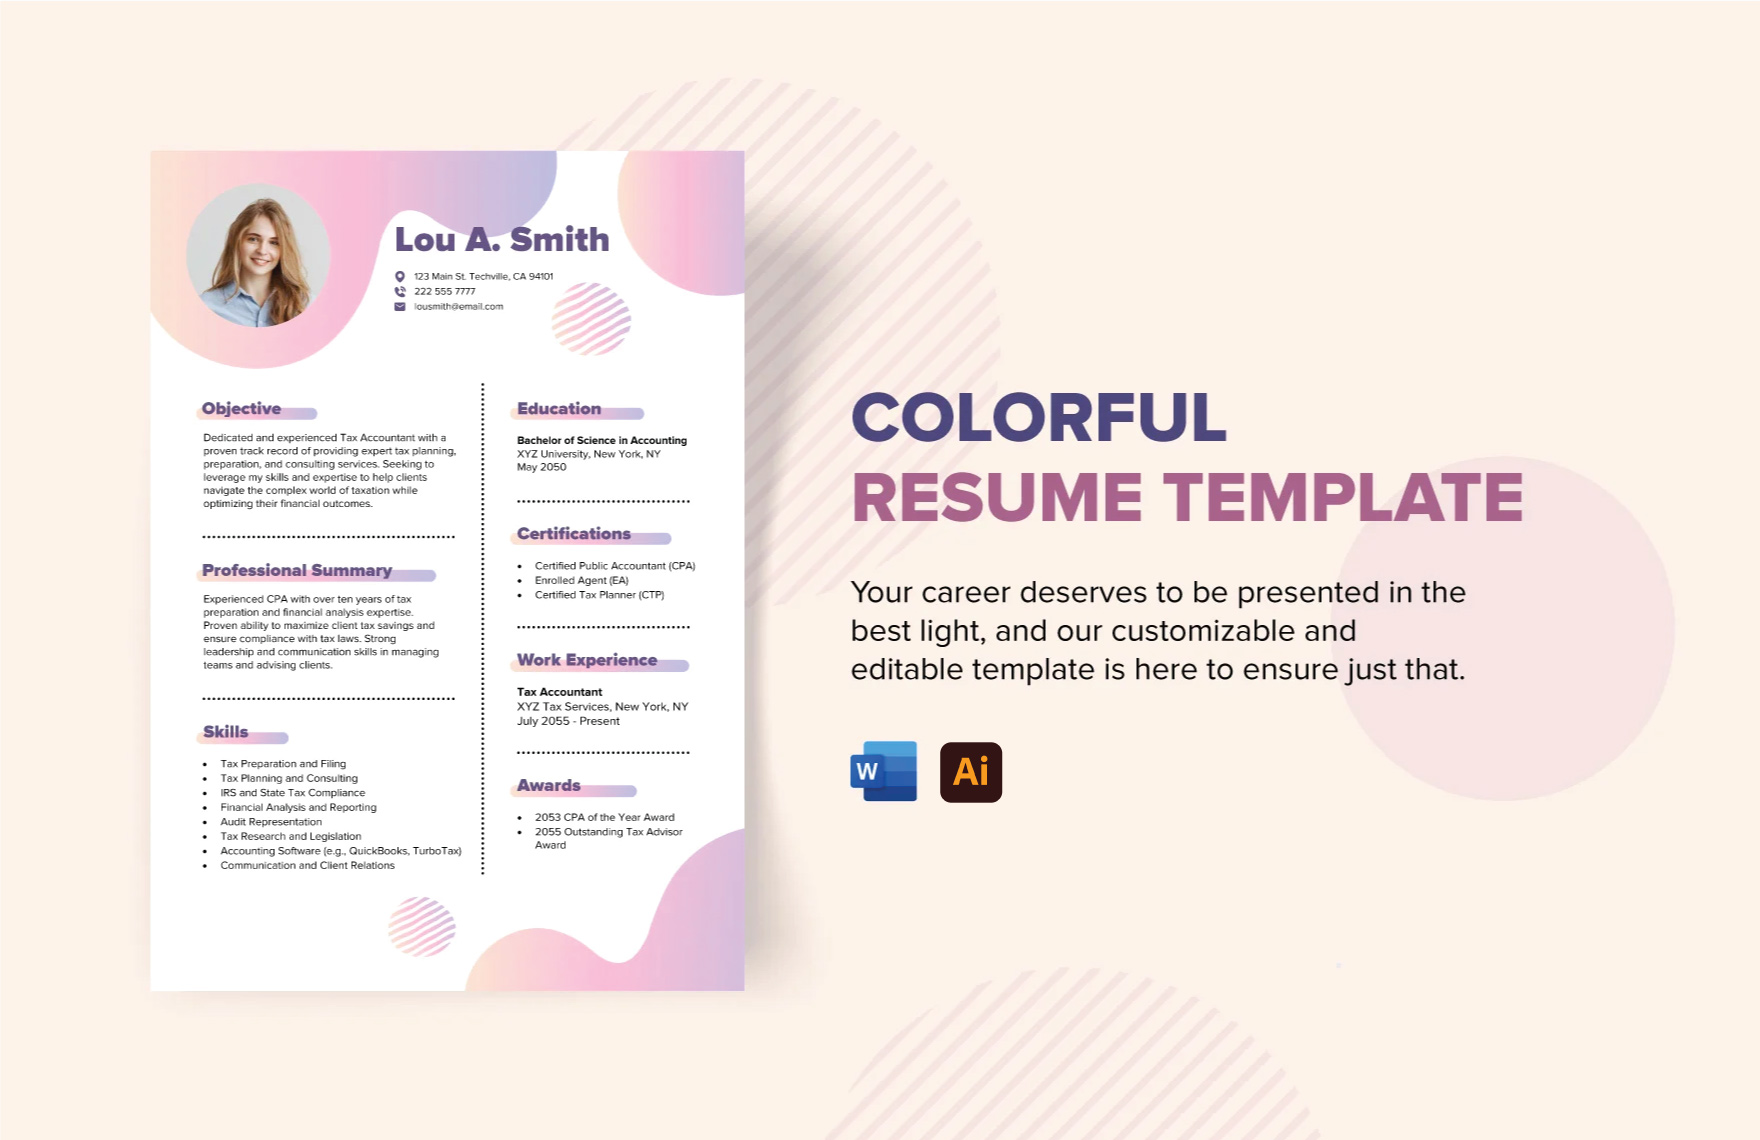 Colorful Resume Template